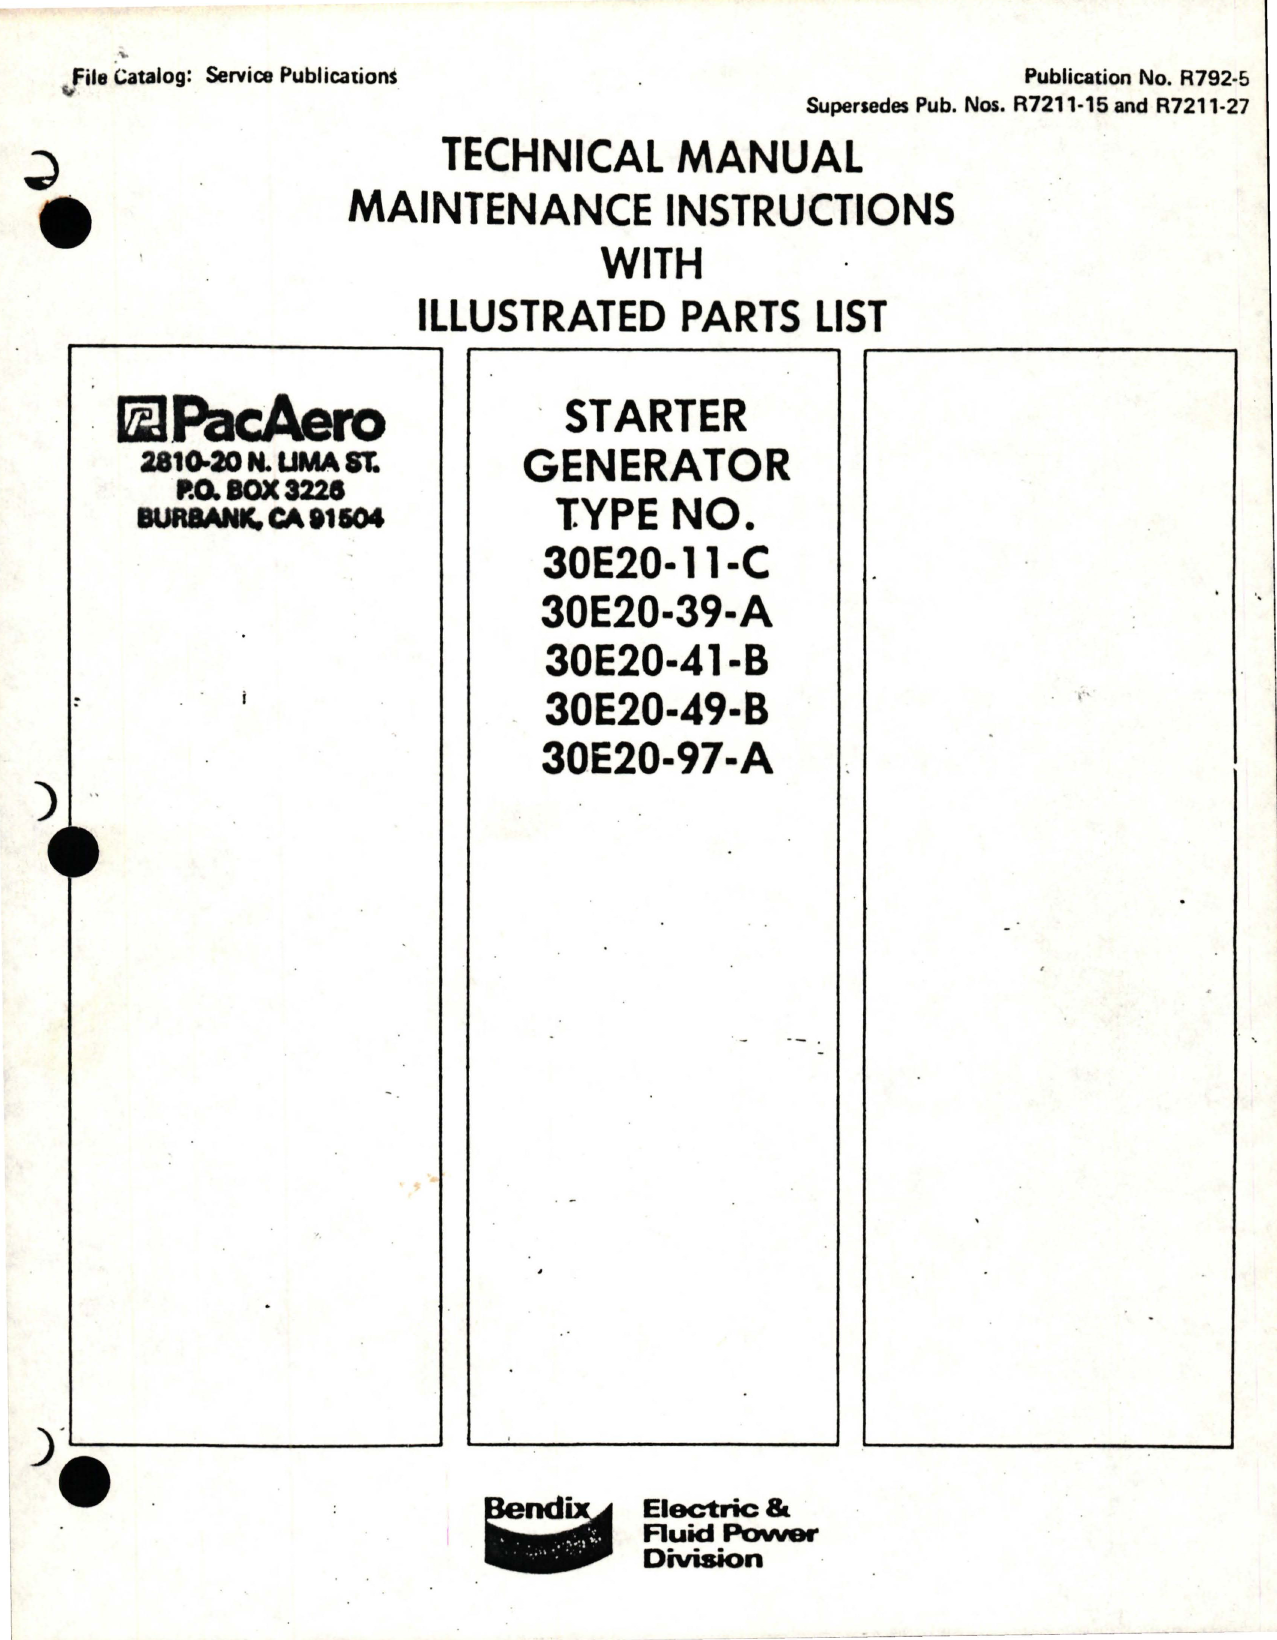 Sample page 1 from AirCorps Library document: Maintenance Instructions with Illustrated Parts List for Starter Generator - Types 30E20-11-C, 30E20-39-A, 30E20-41-B, 30E20-49-B, and 30E20-97-A 